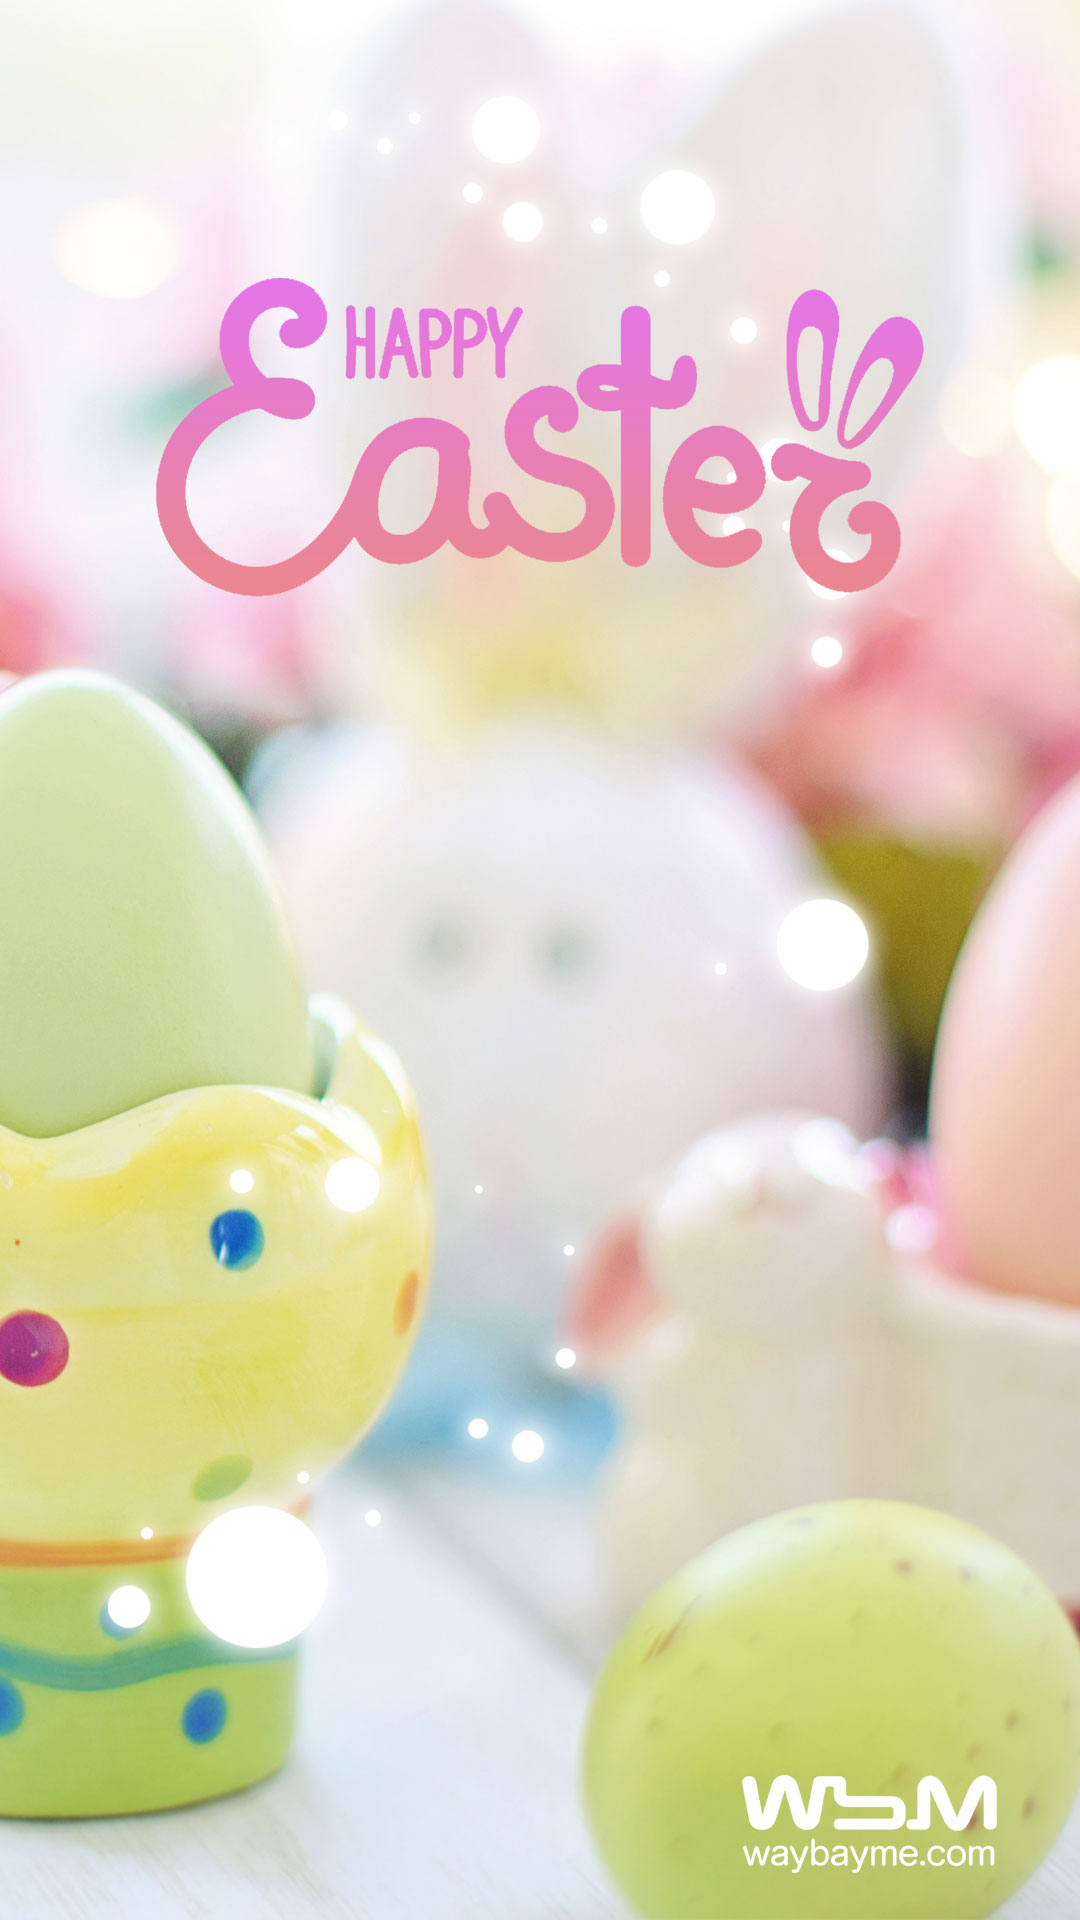 Easter Images, Easter Images HD, Easter HD Images, Easter Egg, Easter Bunny, Easter Rabbit, Easter Hare, Beautiful Easter Images, Easter Pictures, Easter Wishes, Easter Greetings, Easter Wallpapers, Best Easter Images, Easter Messages, Easter Whatsapp Status, Best Easter Greetings